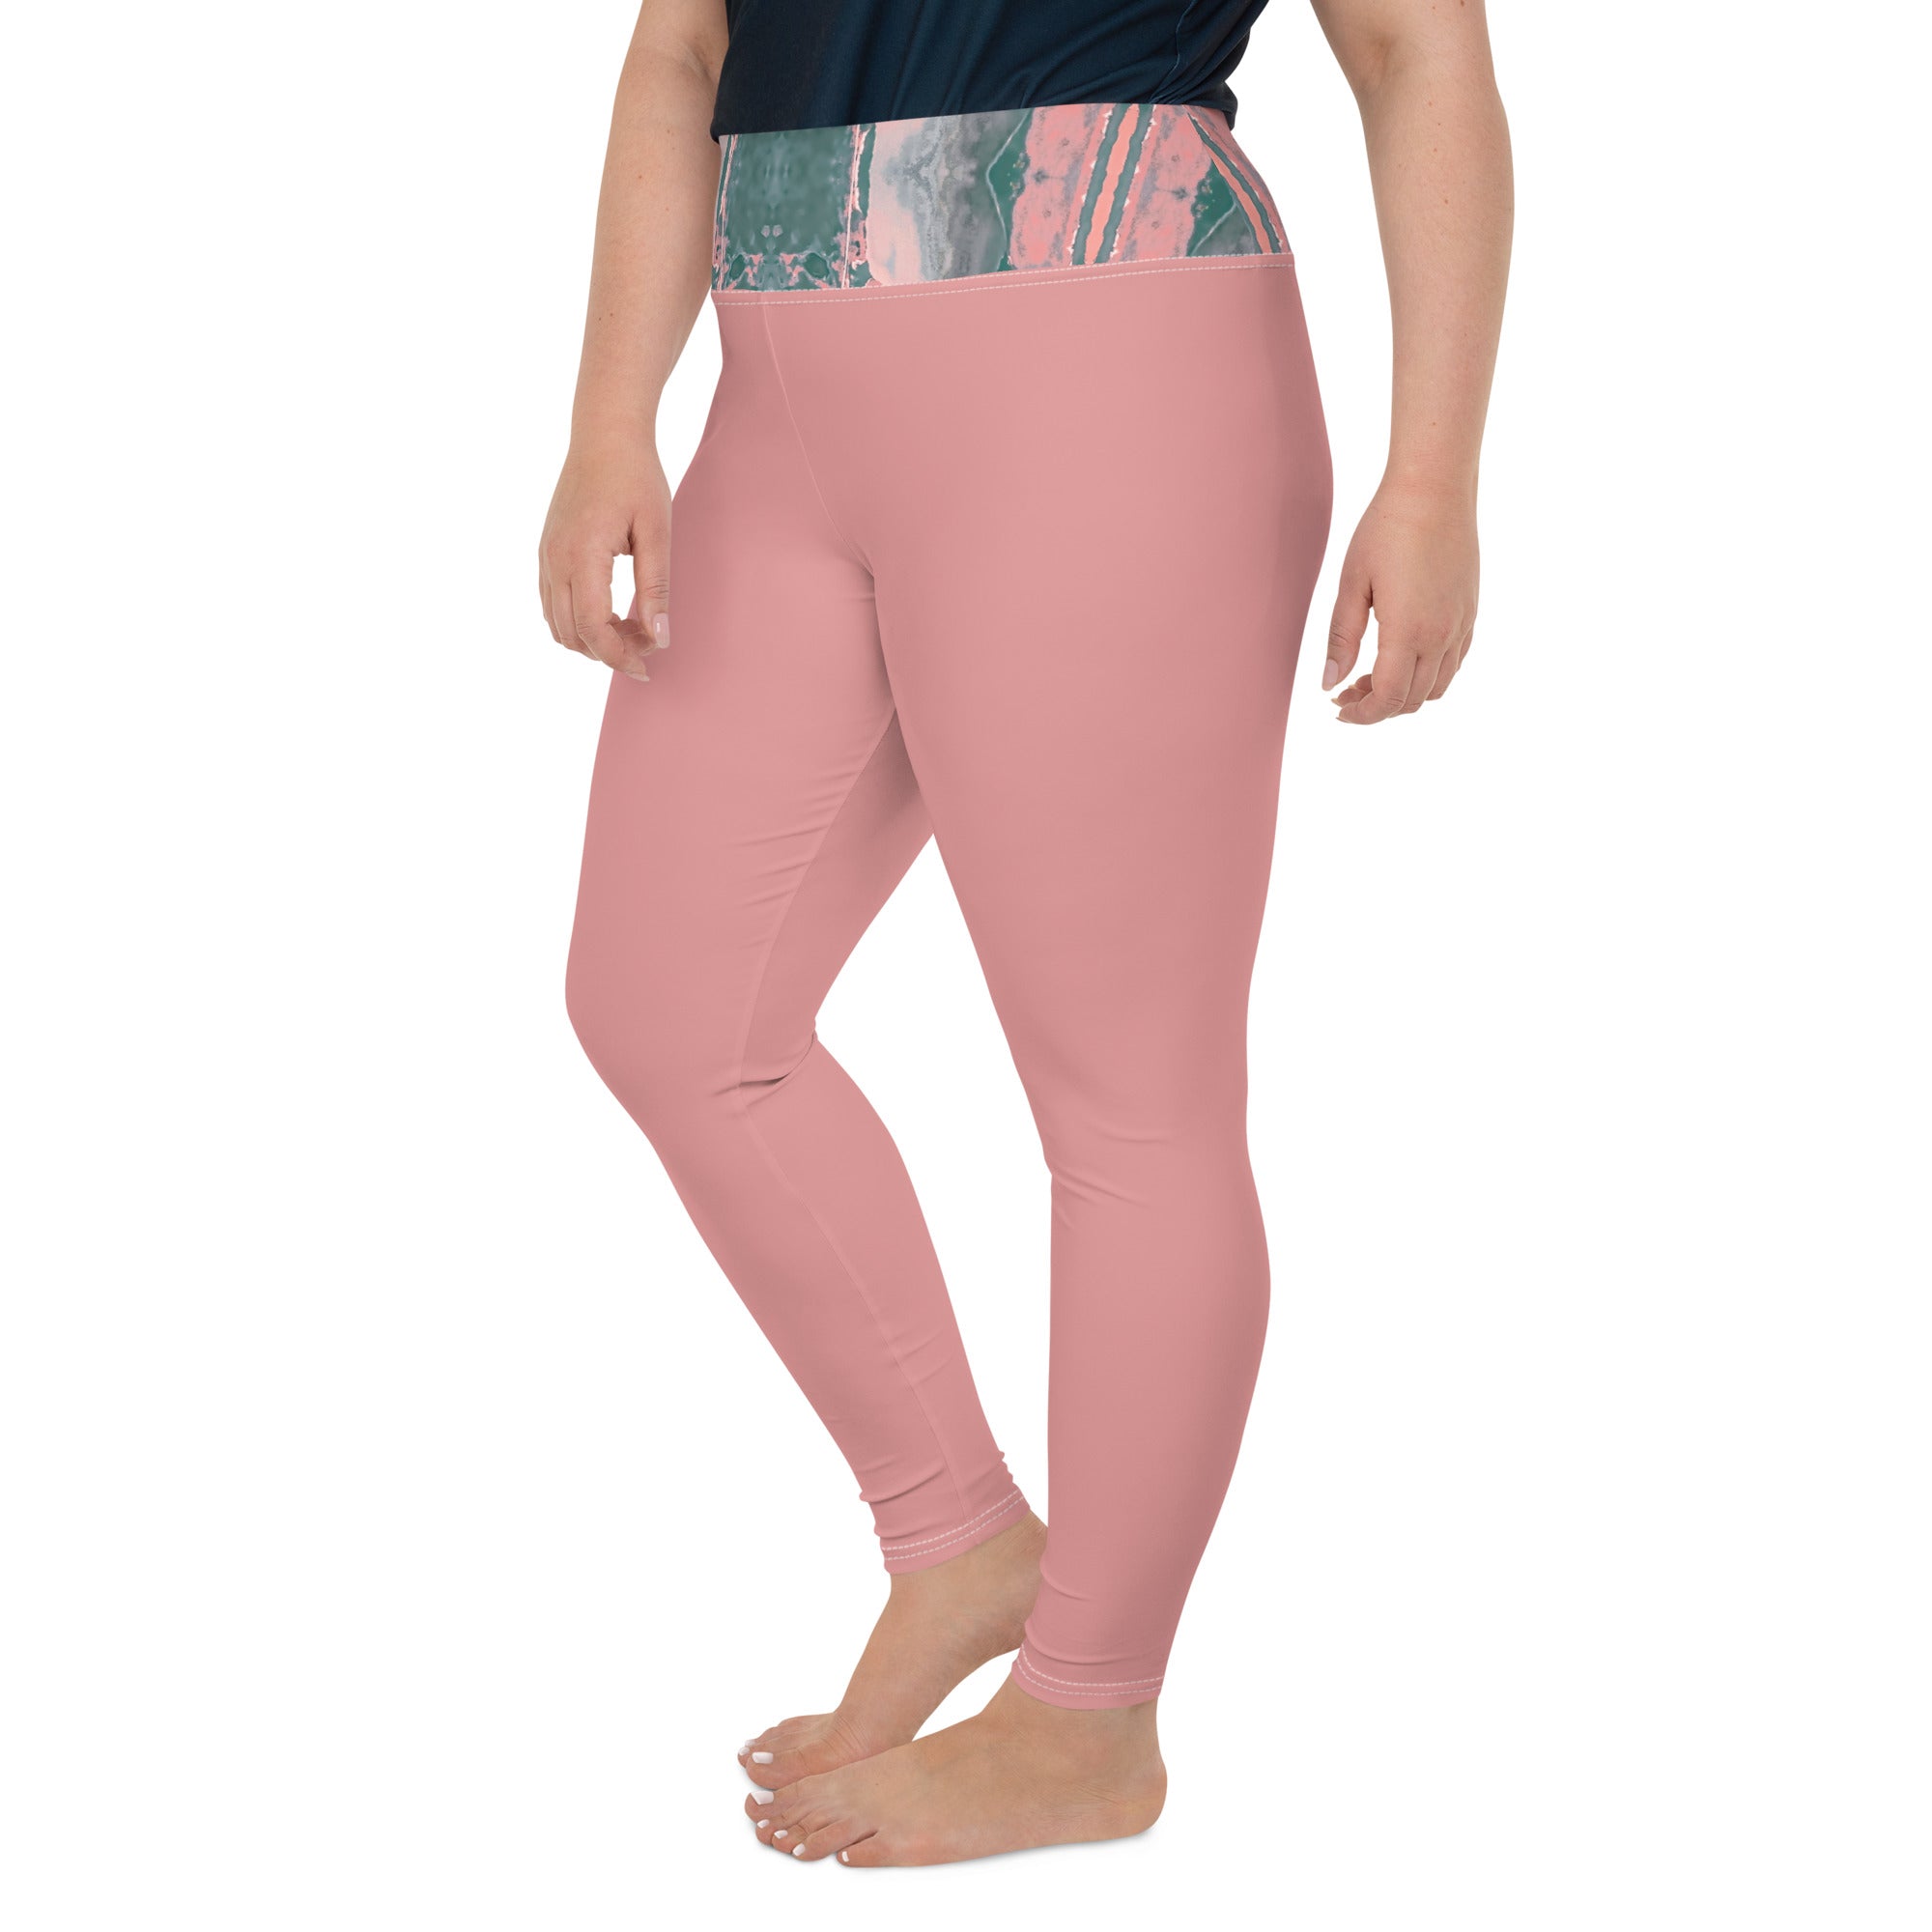 Gulf Shore Solid Color With Printed Waistband Plus Size Leggings Triboca Arts   